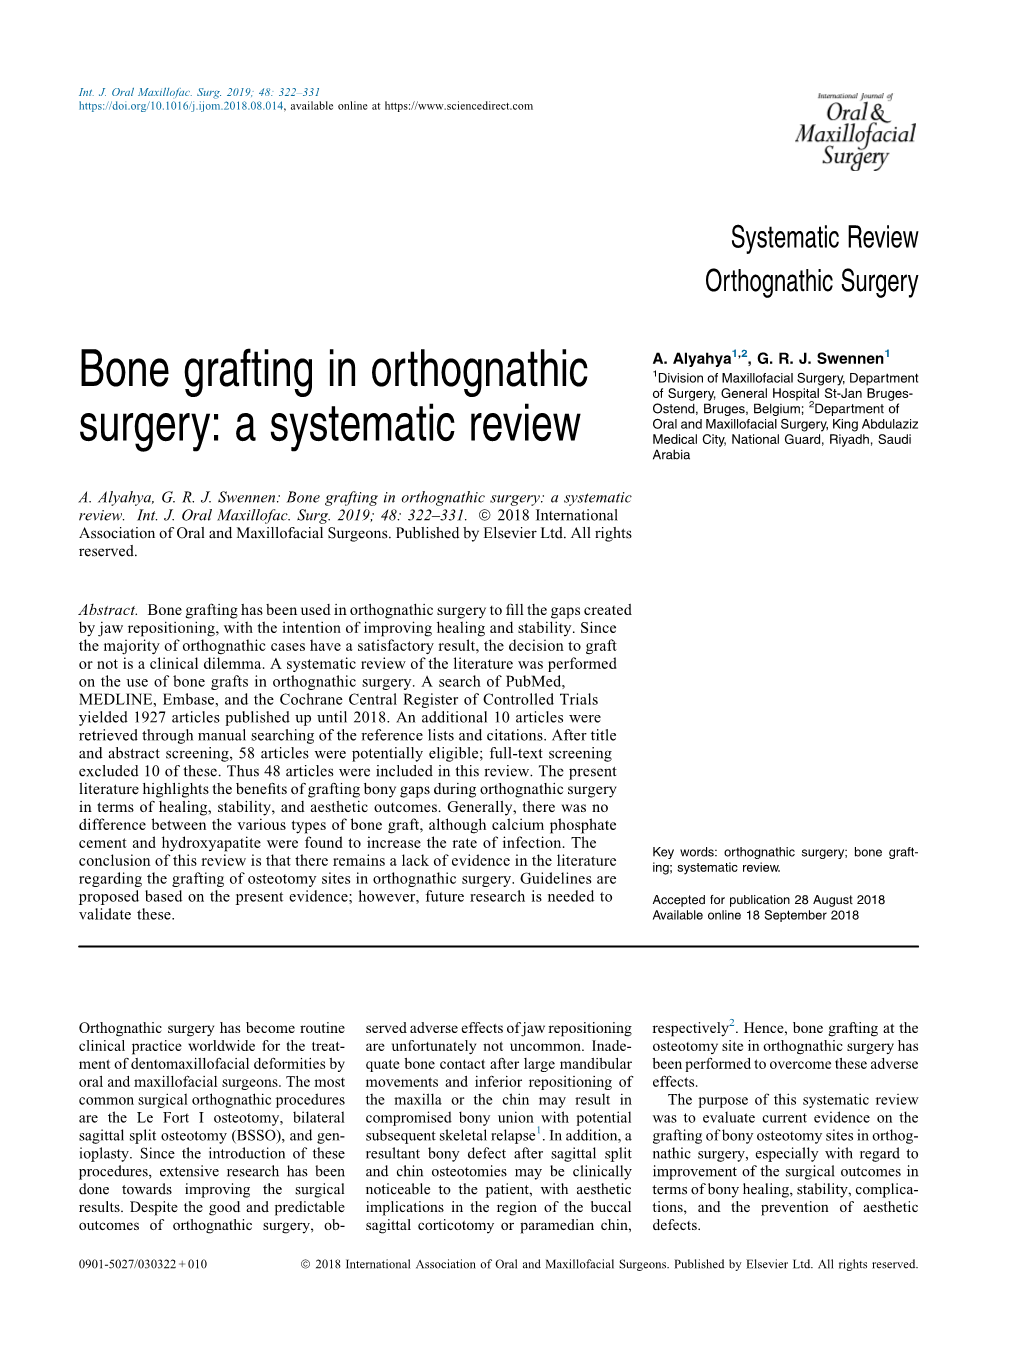 Bone Grafting in Orthognathic Surgery: a Systematic Review